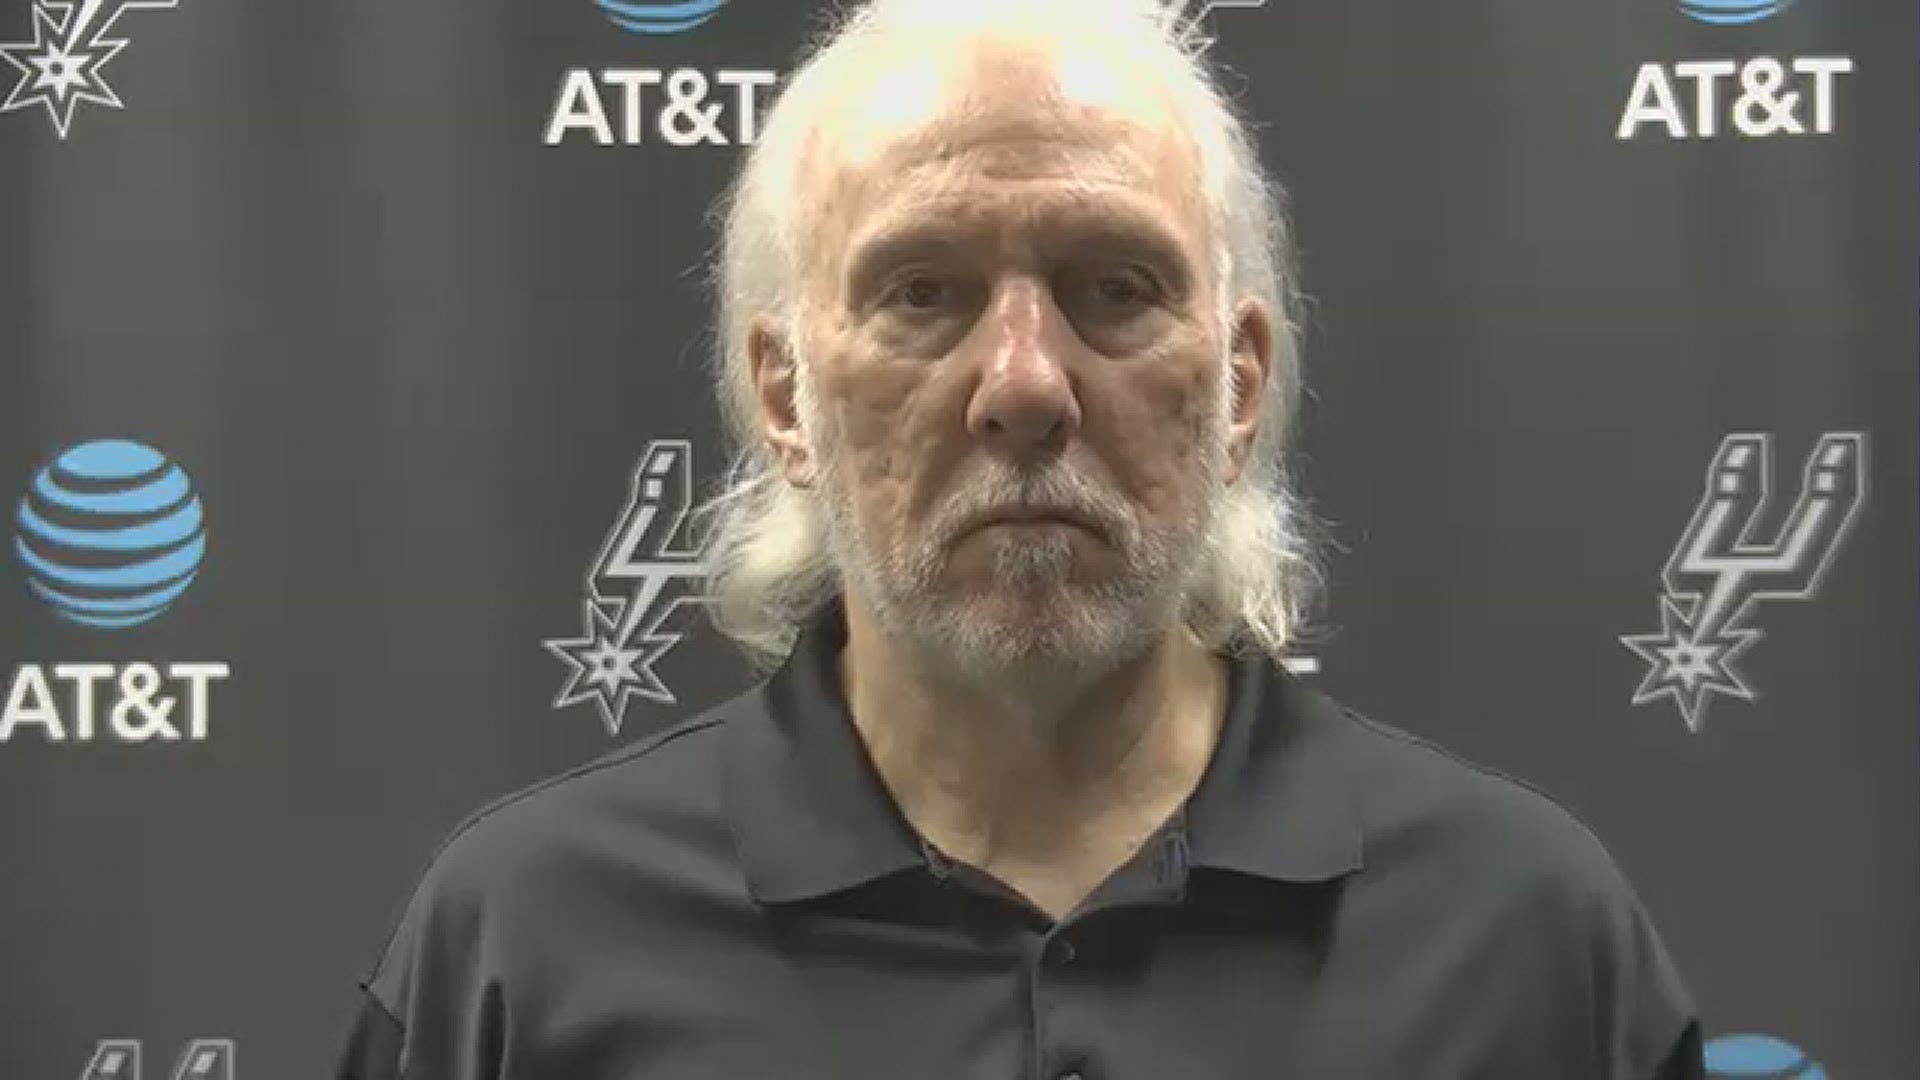 "I thought they were great. I thought they did everything they could do to win the game, you try to compete, you try to execute, we made some mistakes," Pop said.